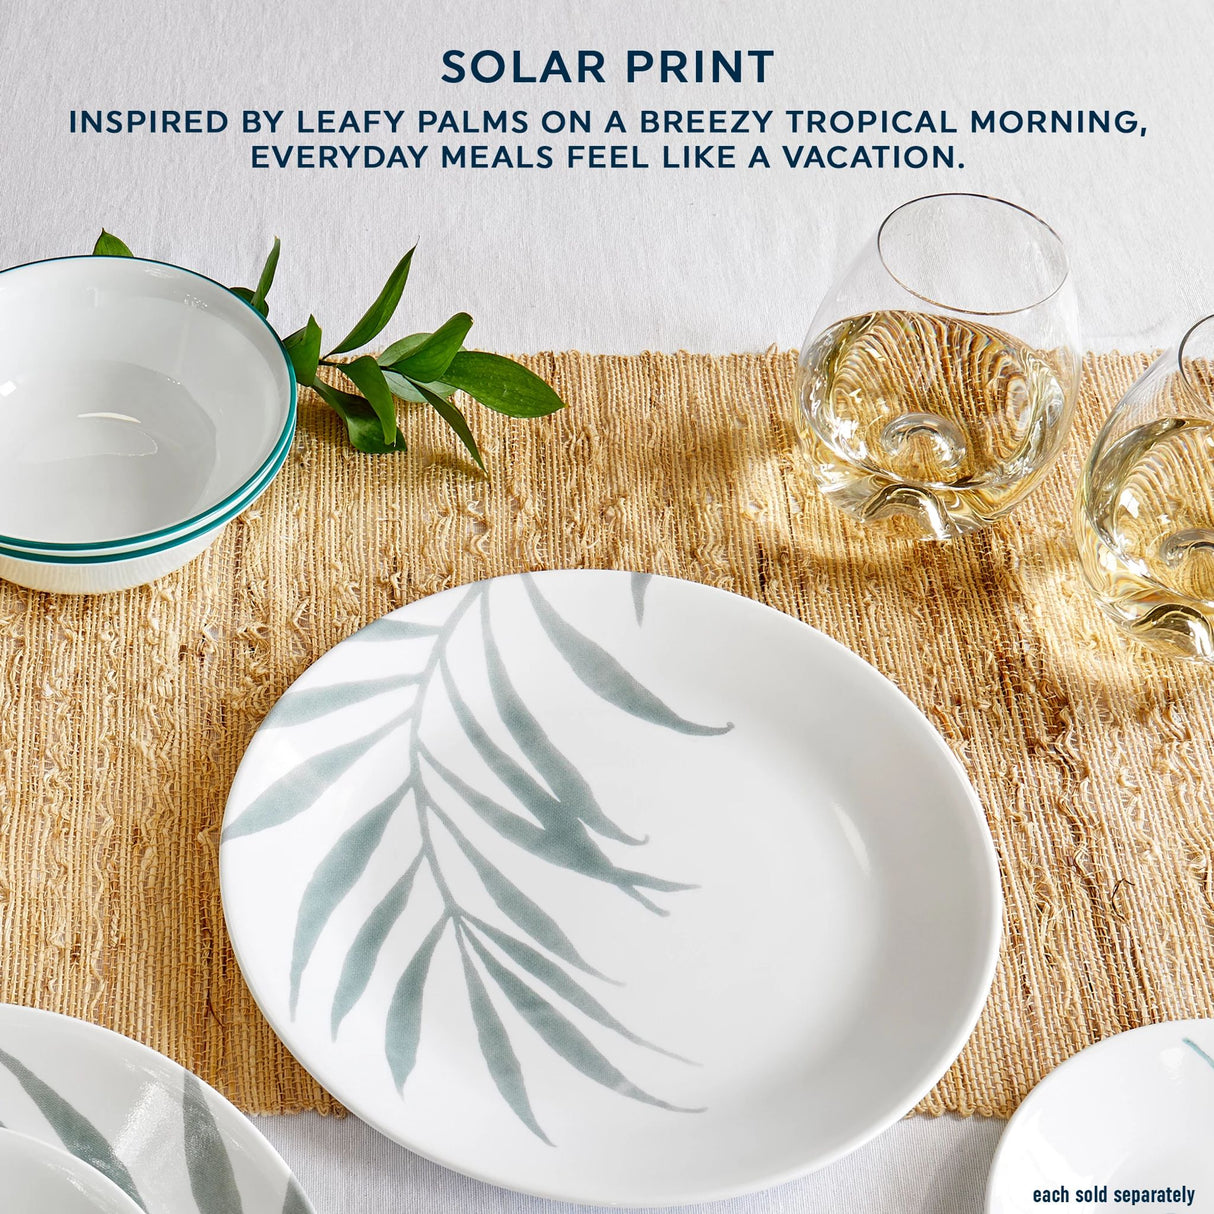  image displaying all Solar print plates &amp; bowls with text inspired by leafy palms on a breezy tropical morning